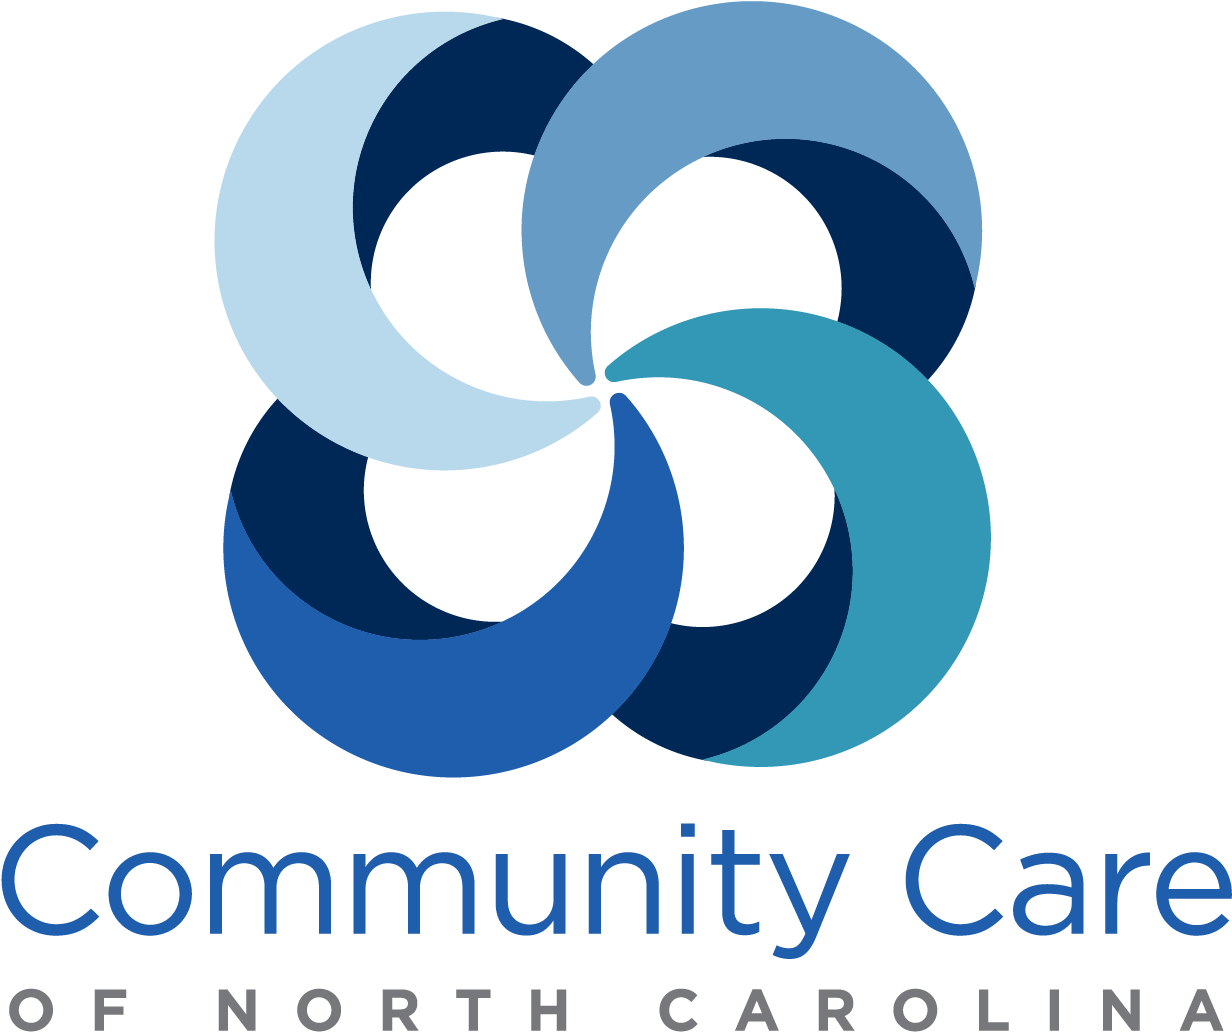 A Project Of Community Care Of North Carolina - Community Care Of North Carolina (1294x1125)